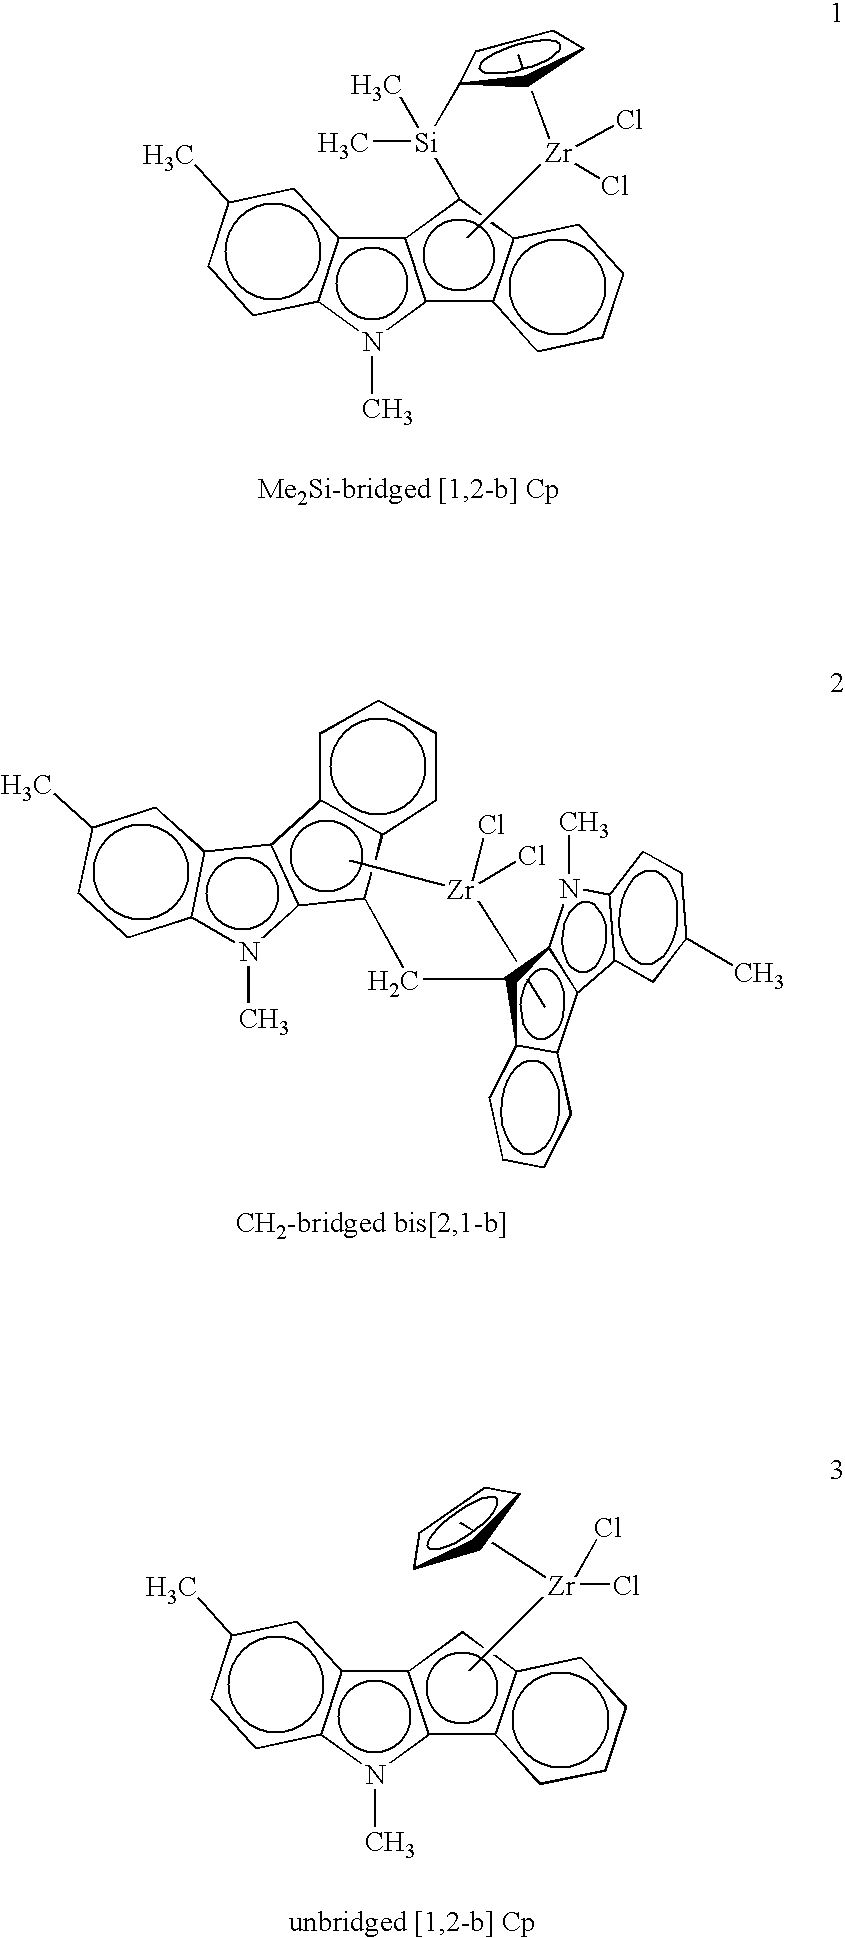 Olefin polymerization process with improved operability and polymer properties